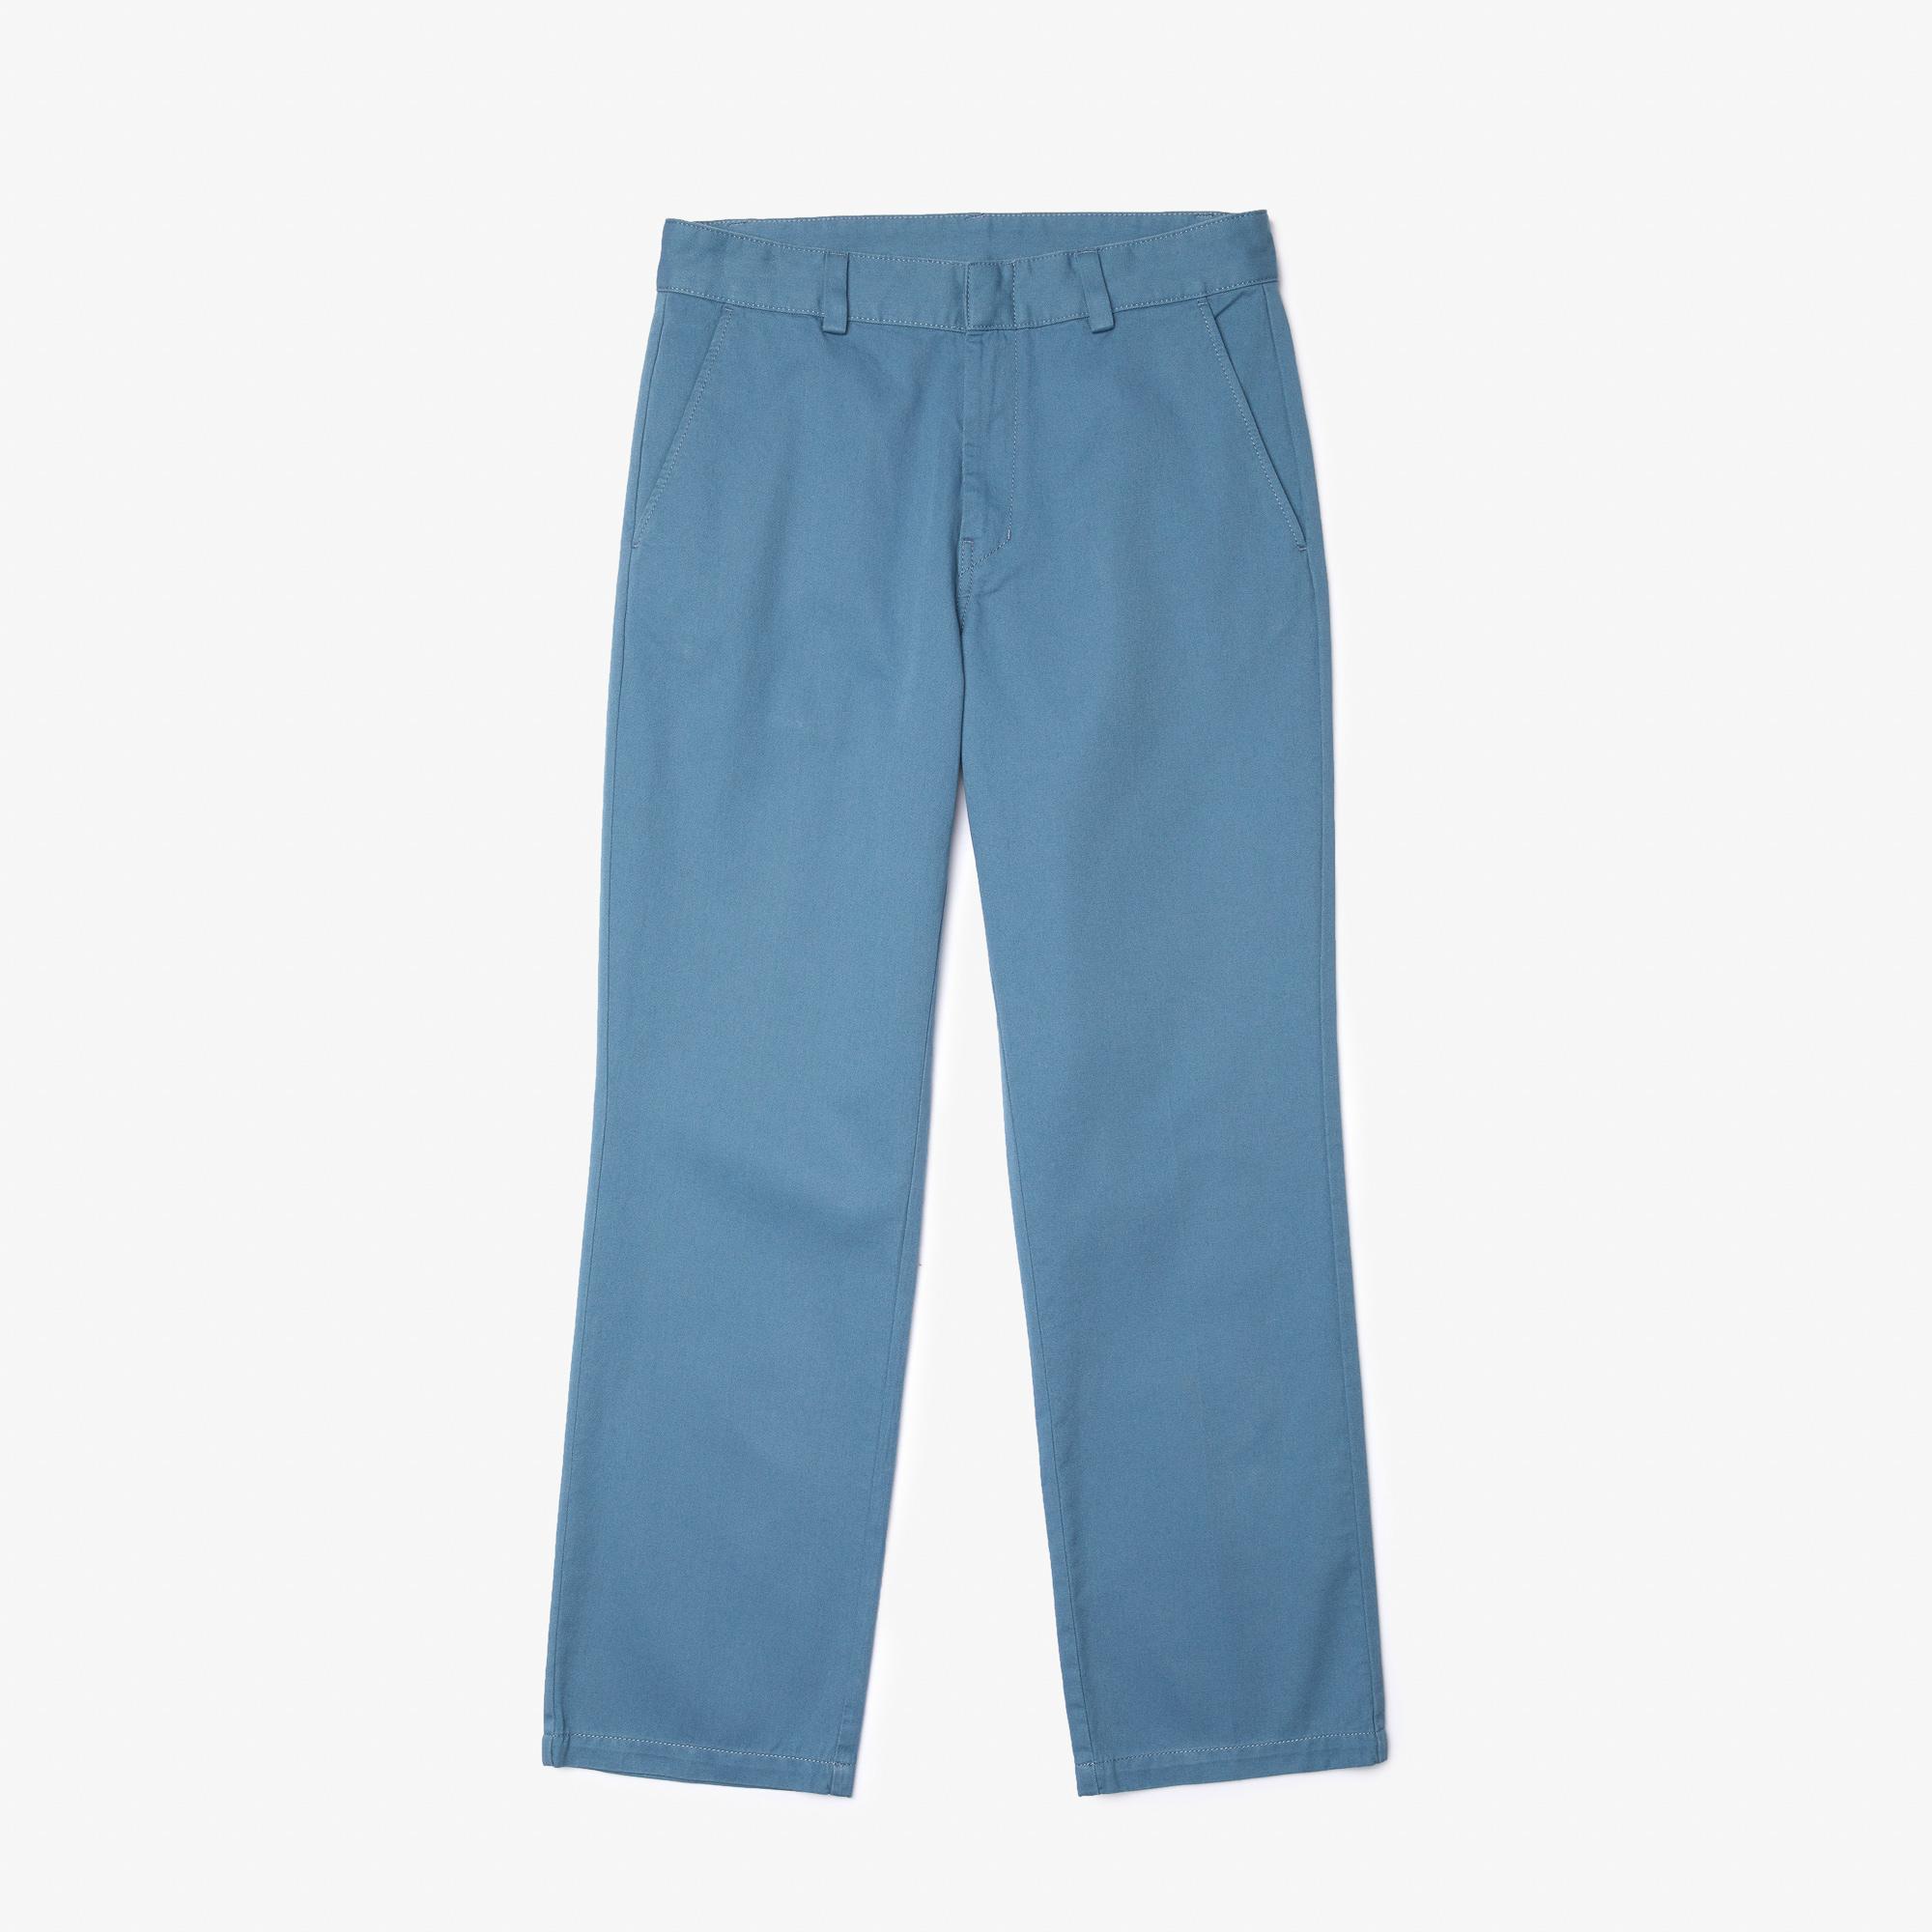 Lacoste Live Men's Bawełniane Pants  Chino Type With Standard Fit Tabs